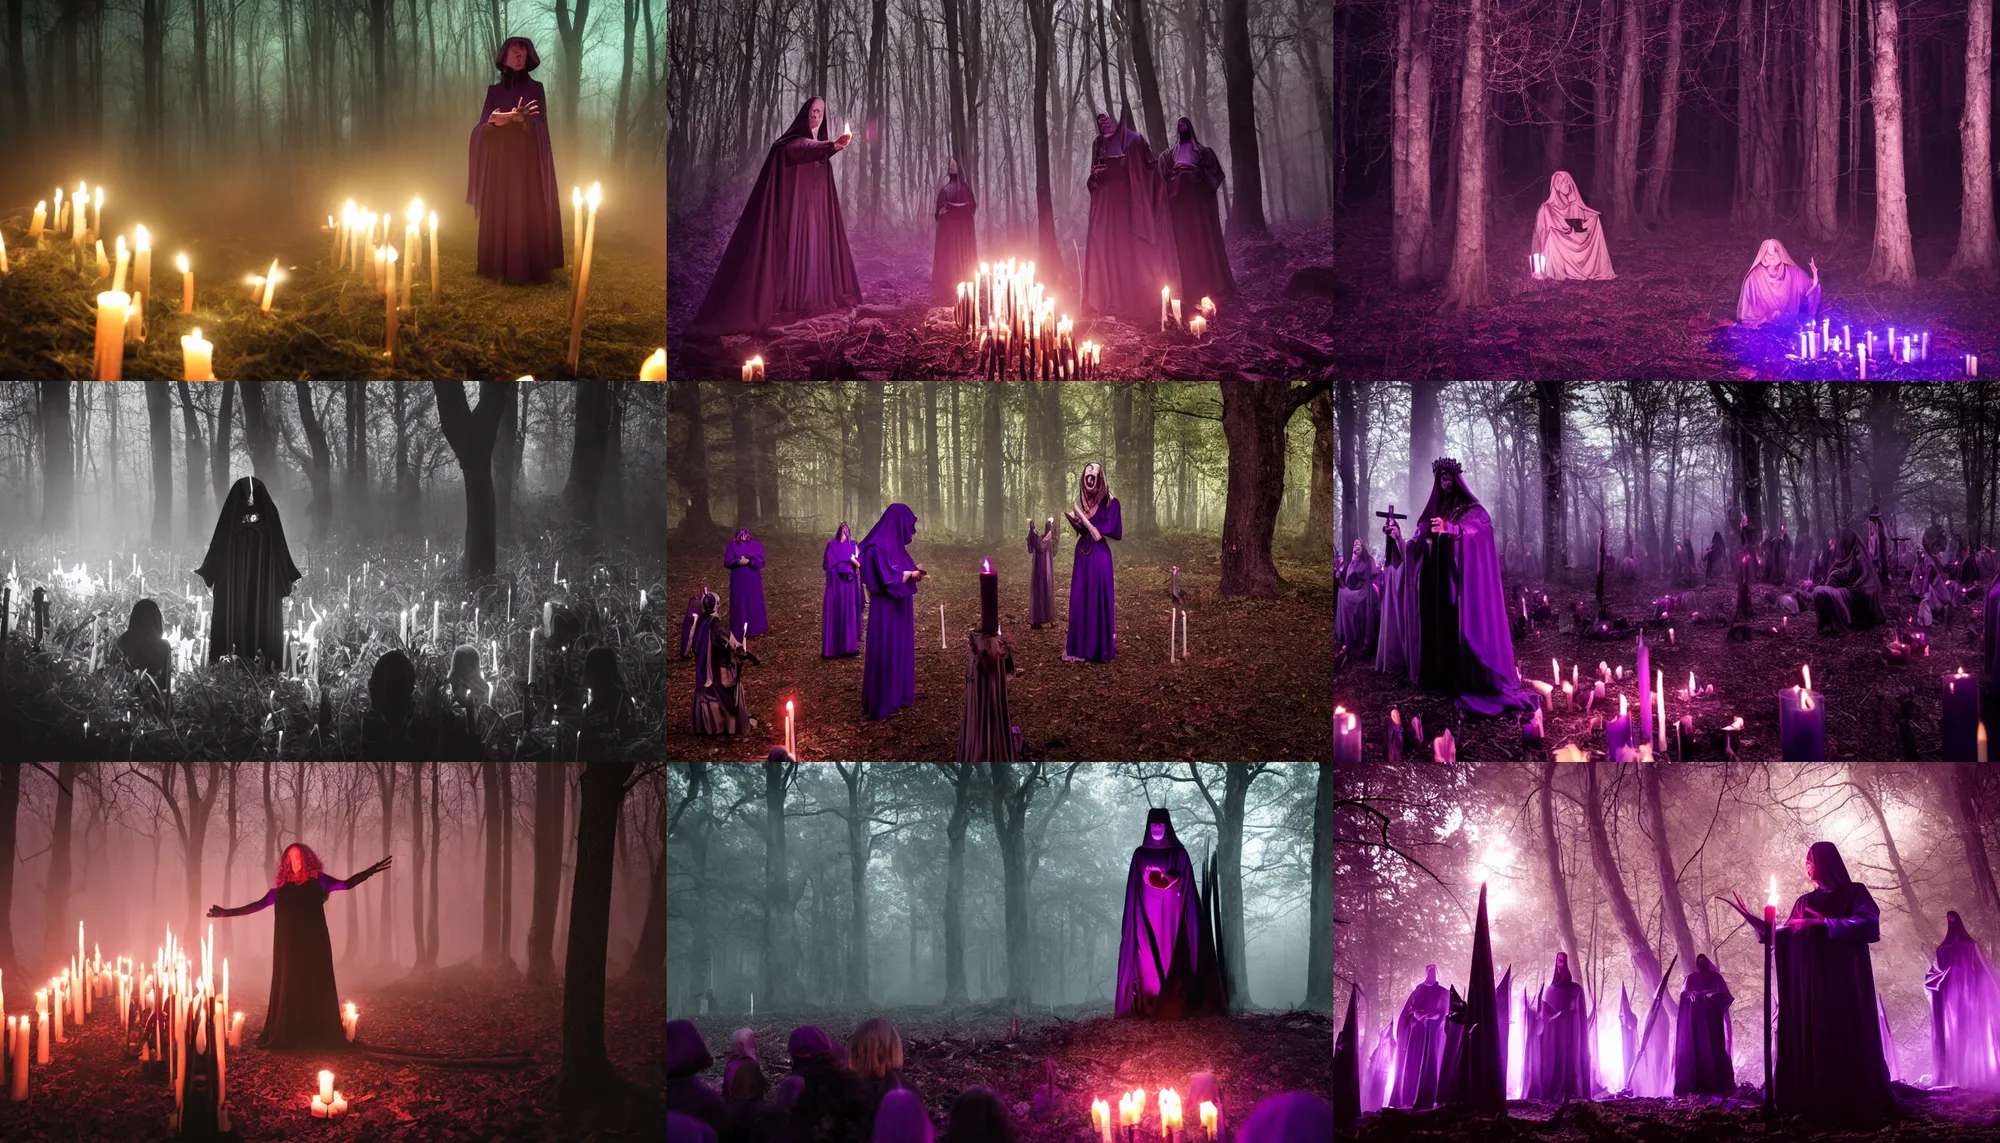 Prompt: ominous picture of the High priestess of the old ones cult preaching to her followers, dark forest illuminated by candles, purple color scheme, focus, sharp, award winning photograph.